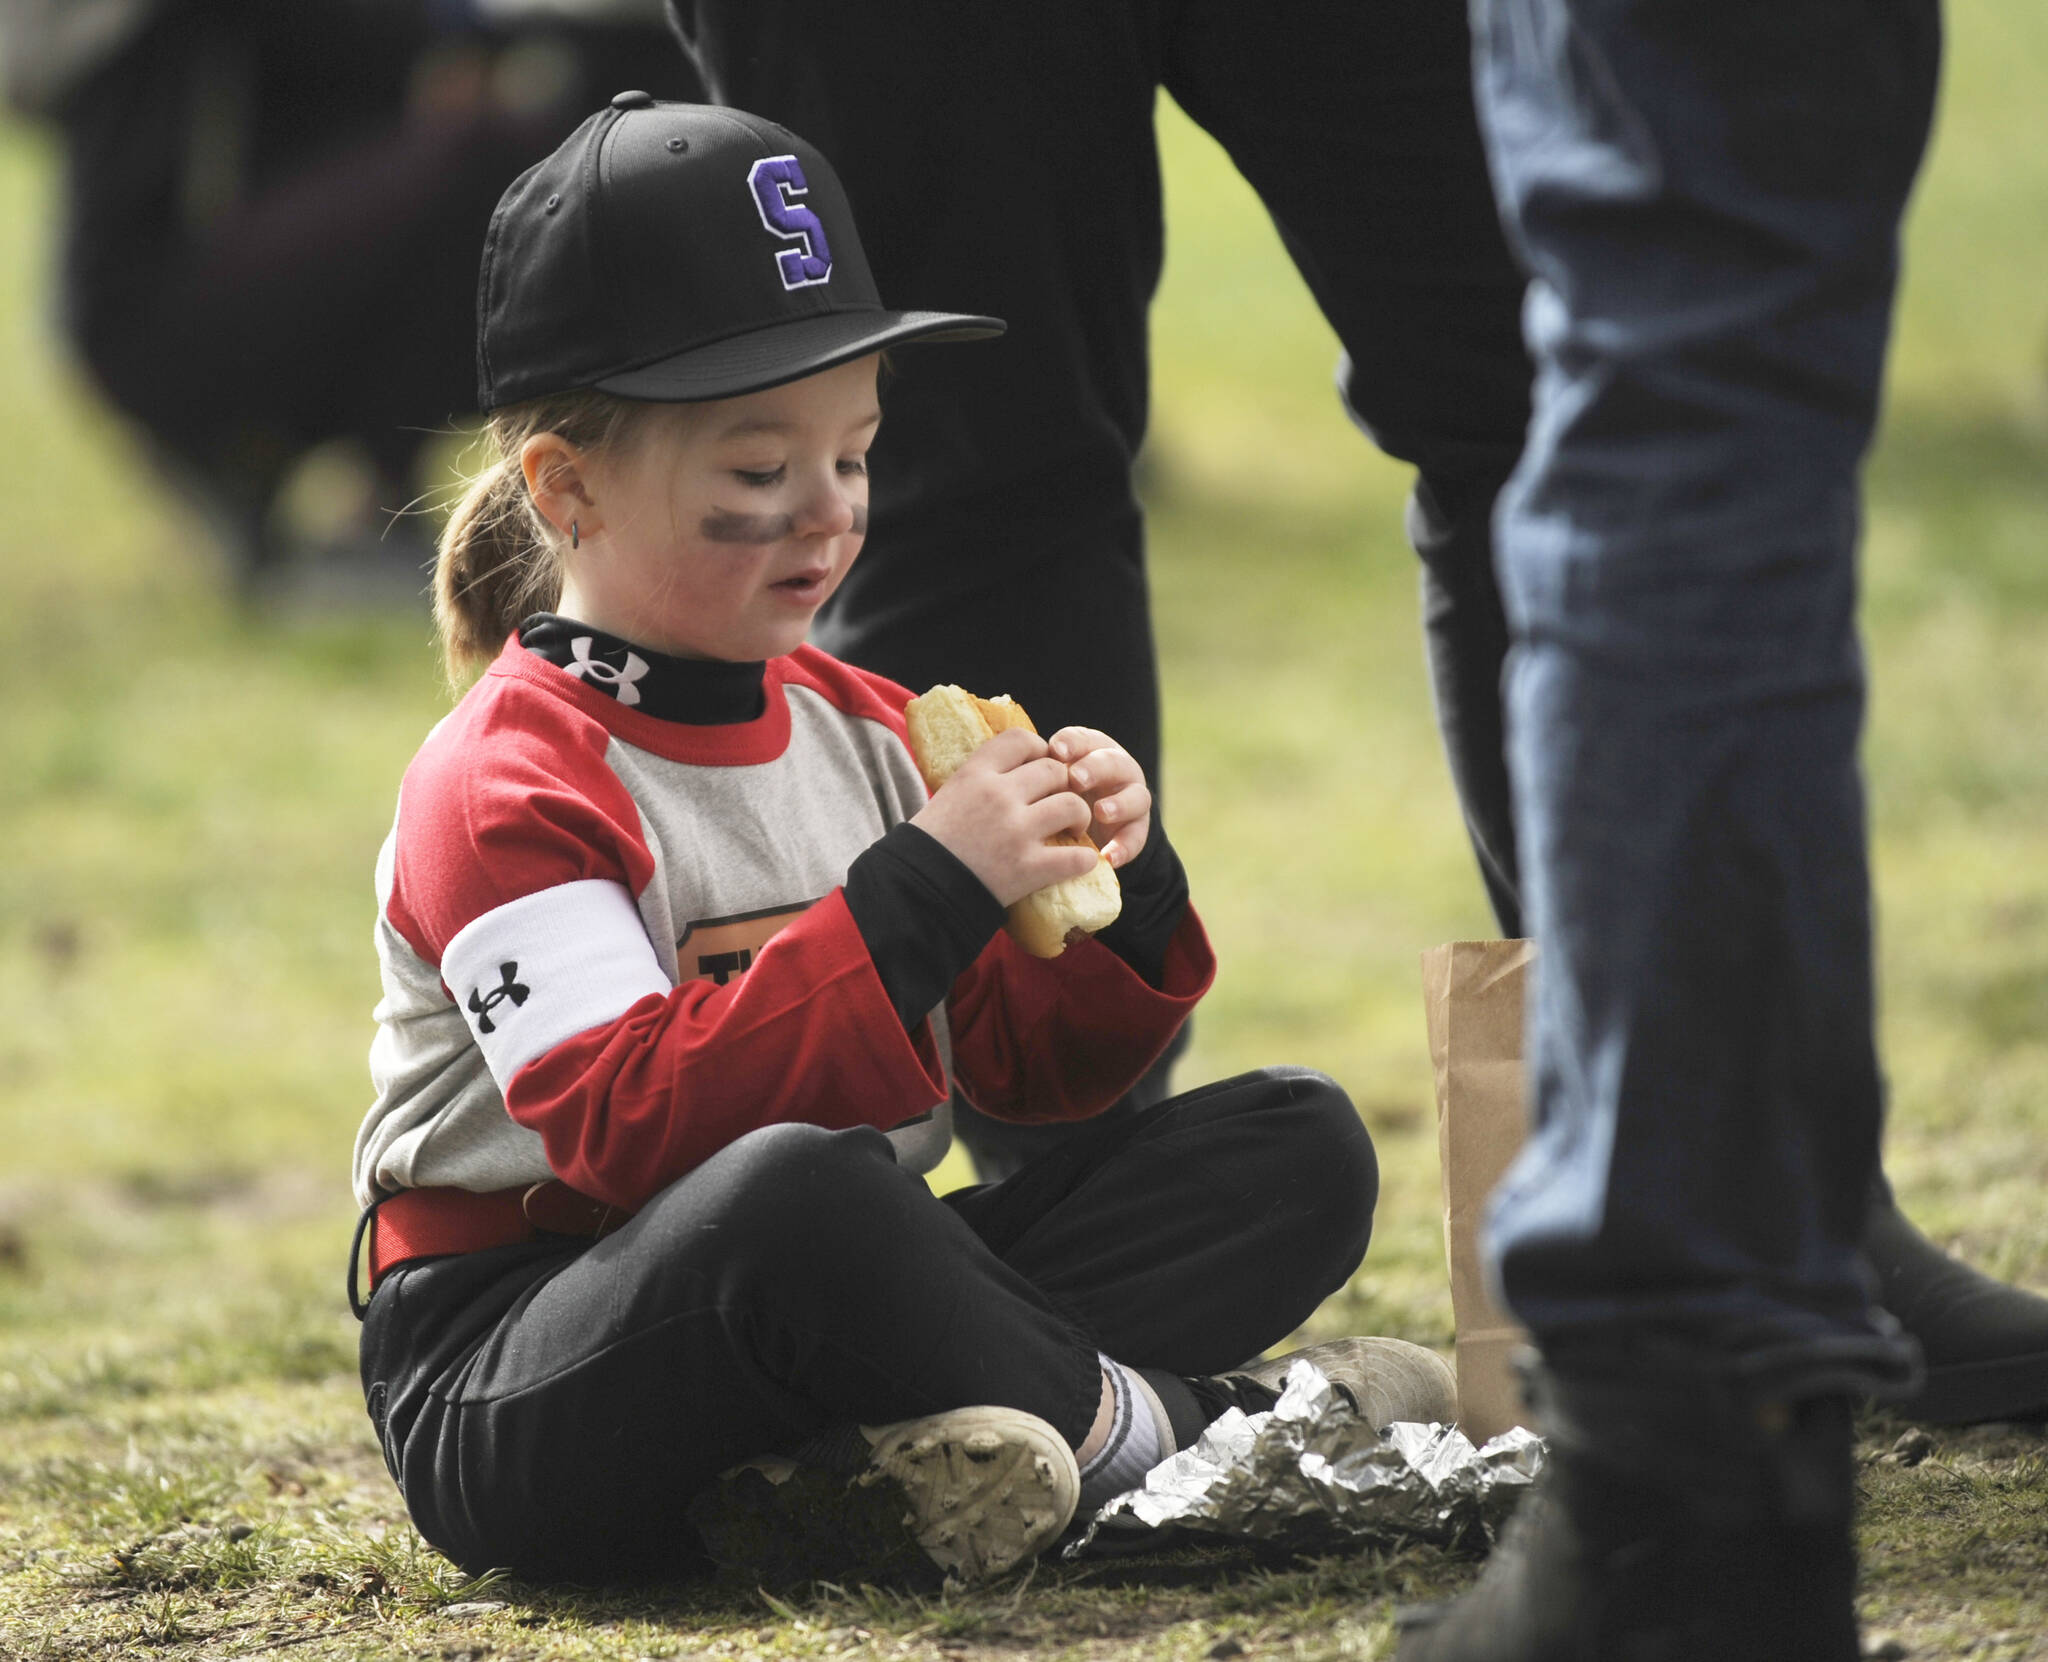 Lachlynn Henning, 5, enjoys a hot dog lunch at the Sequim Little League Opening Day ceremonies on March 25. Sponsored by Clallam County Professional Firefighters IAFF Local 2933, the event included free hot dog lunches for players and coaches.